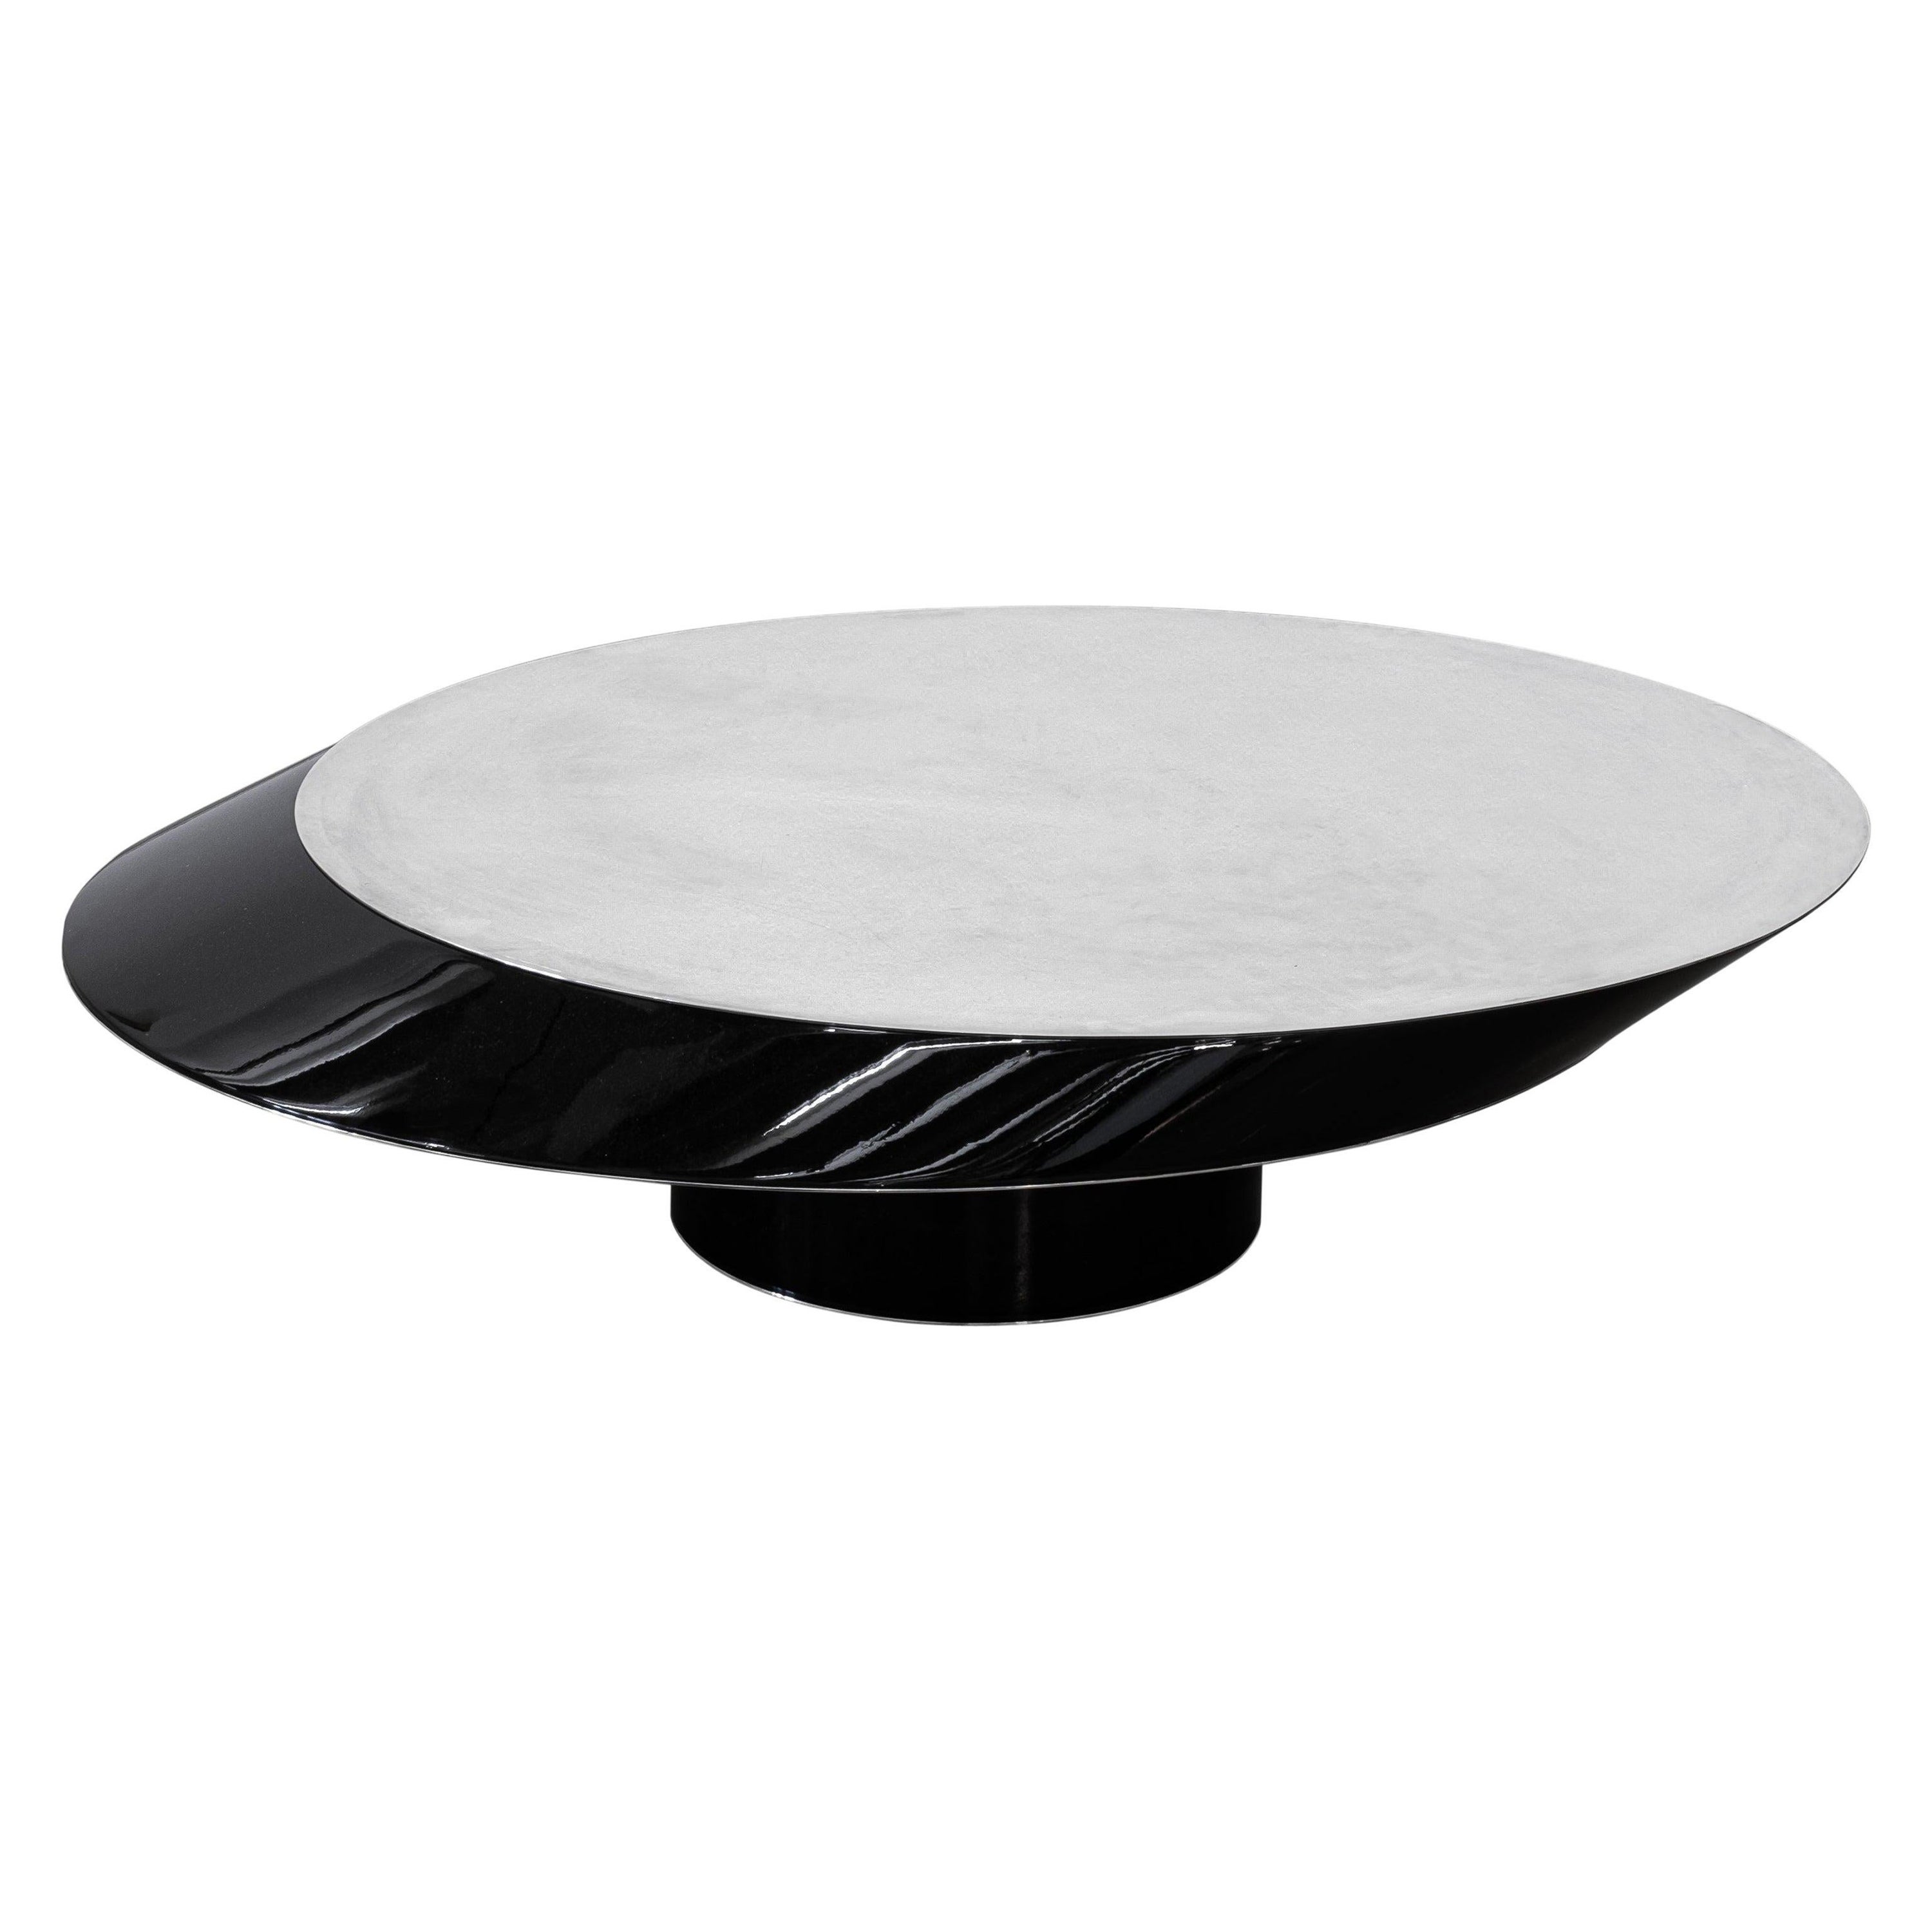 Distortion Series Object 2 Marble Table Coffee Table by Emelianova Studio For Sale